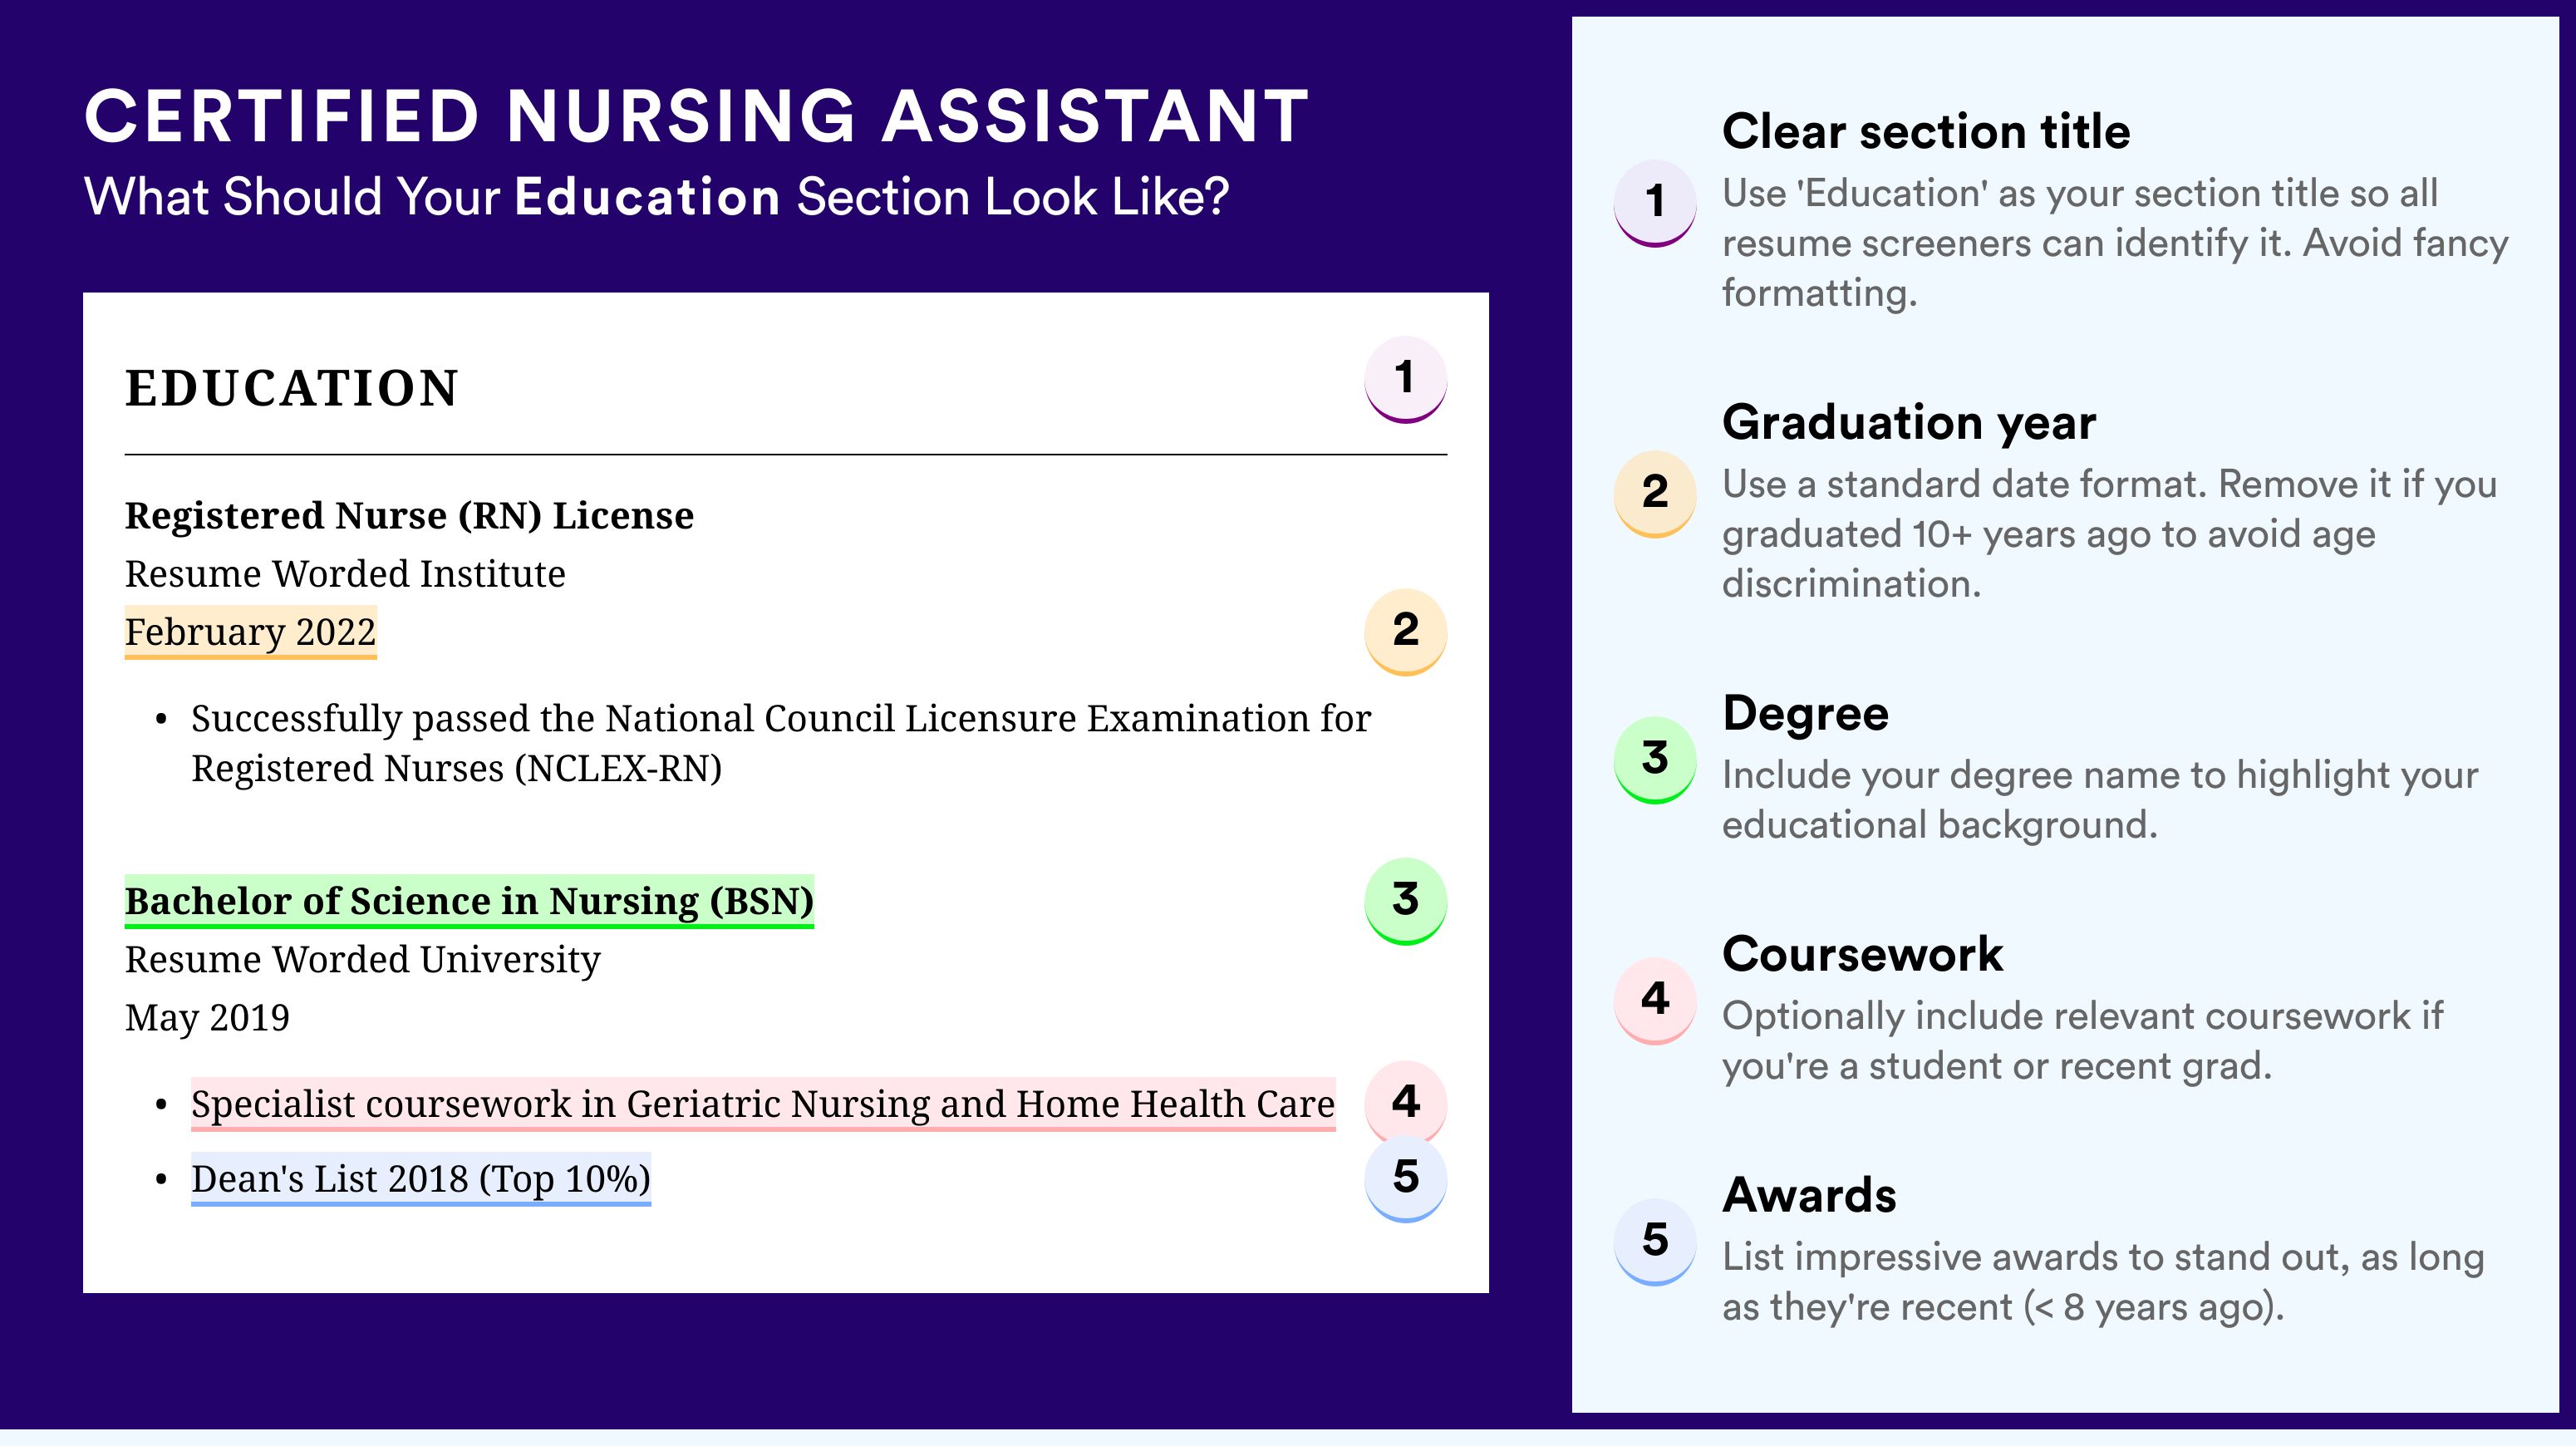 How To Write An Education Section - Certified Nursing Assistant Roles